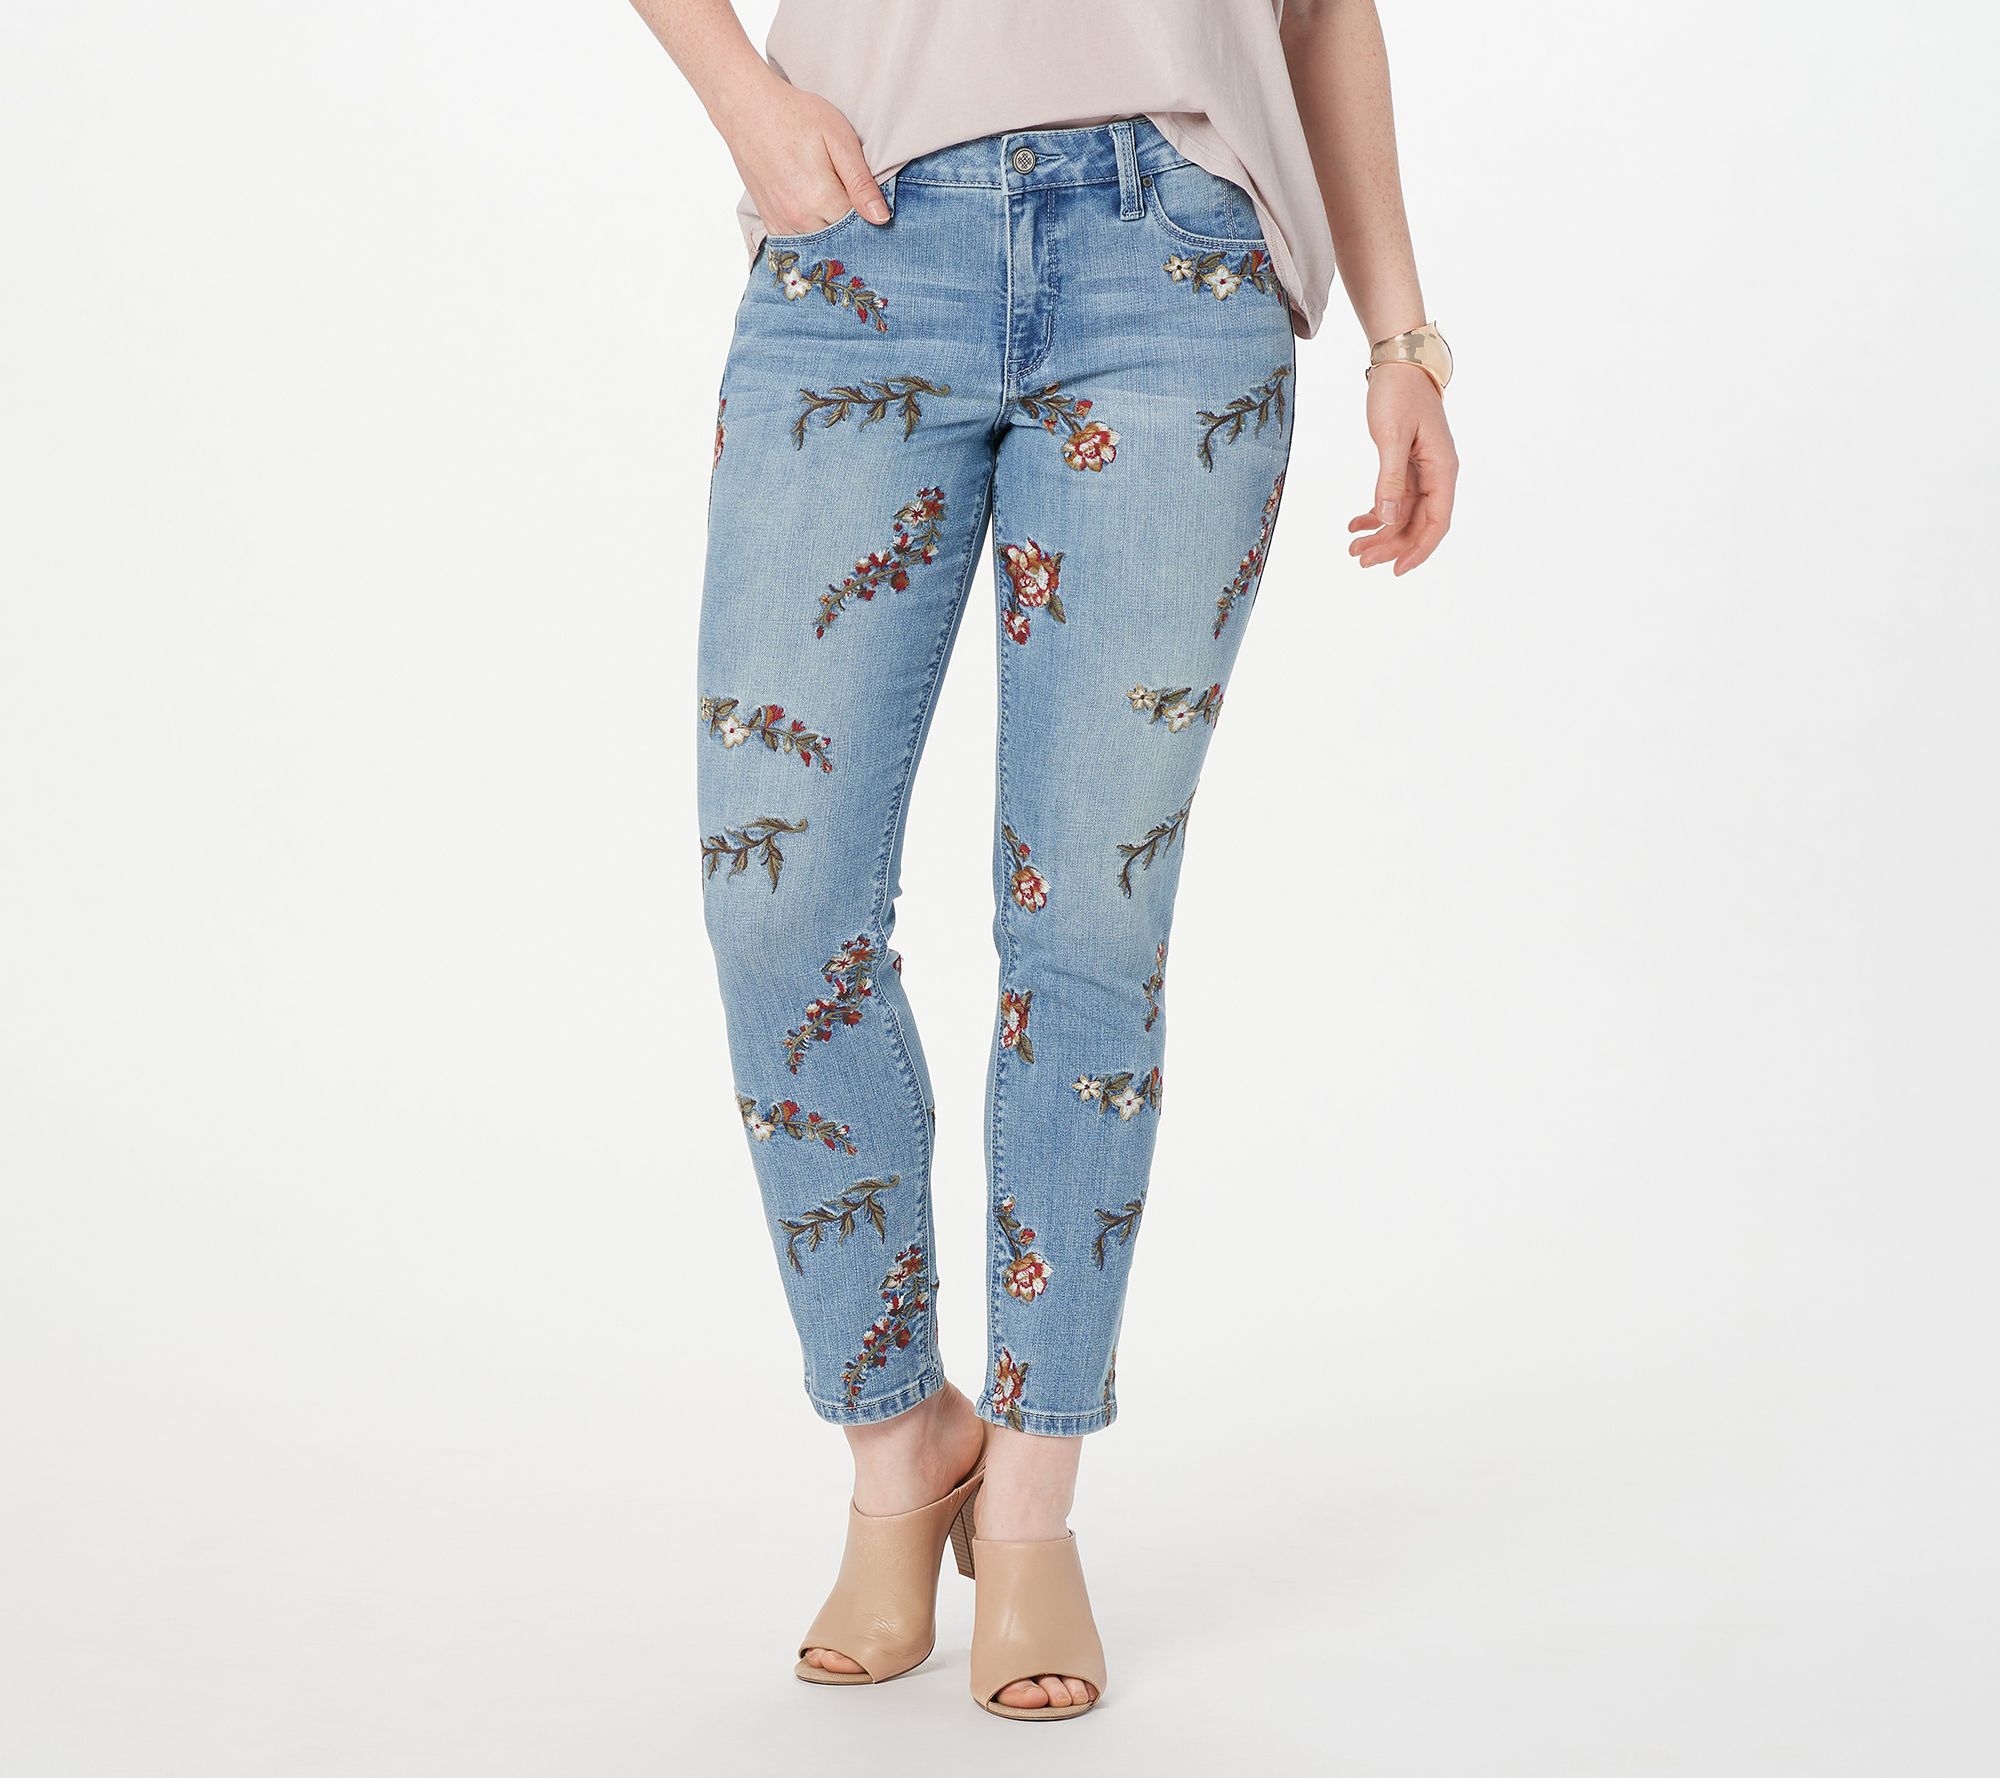 laurie felt embroidered jeans